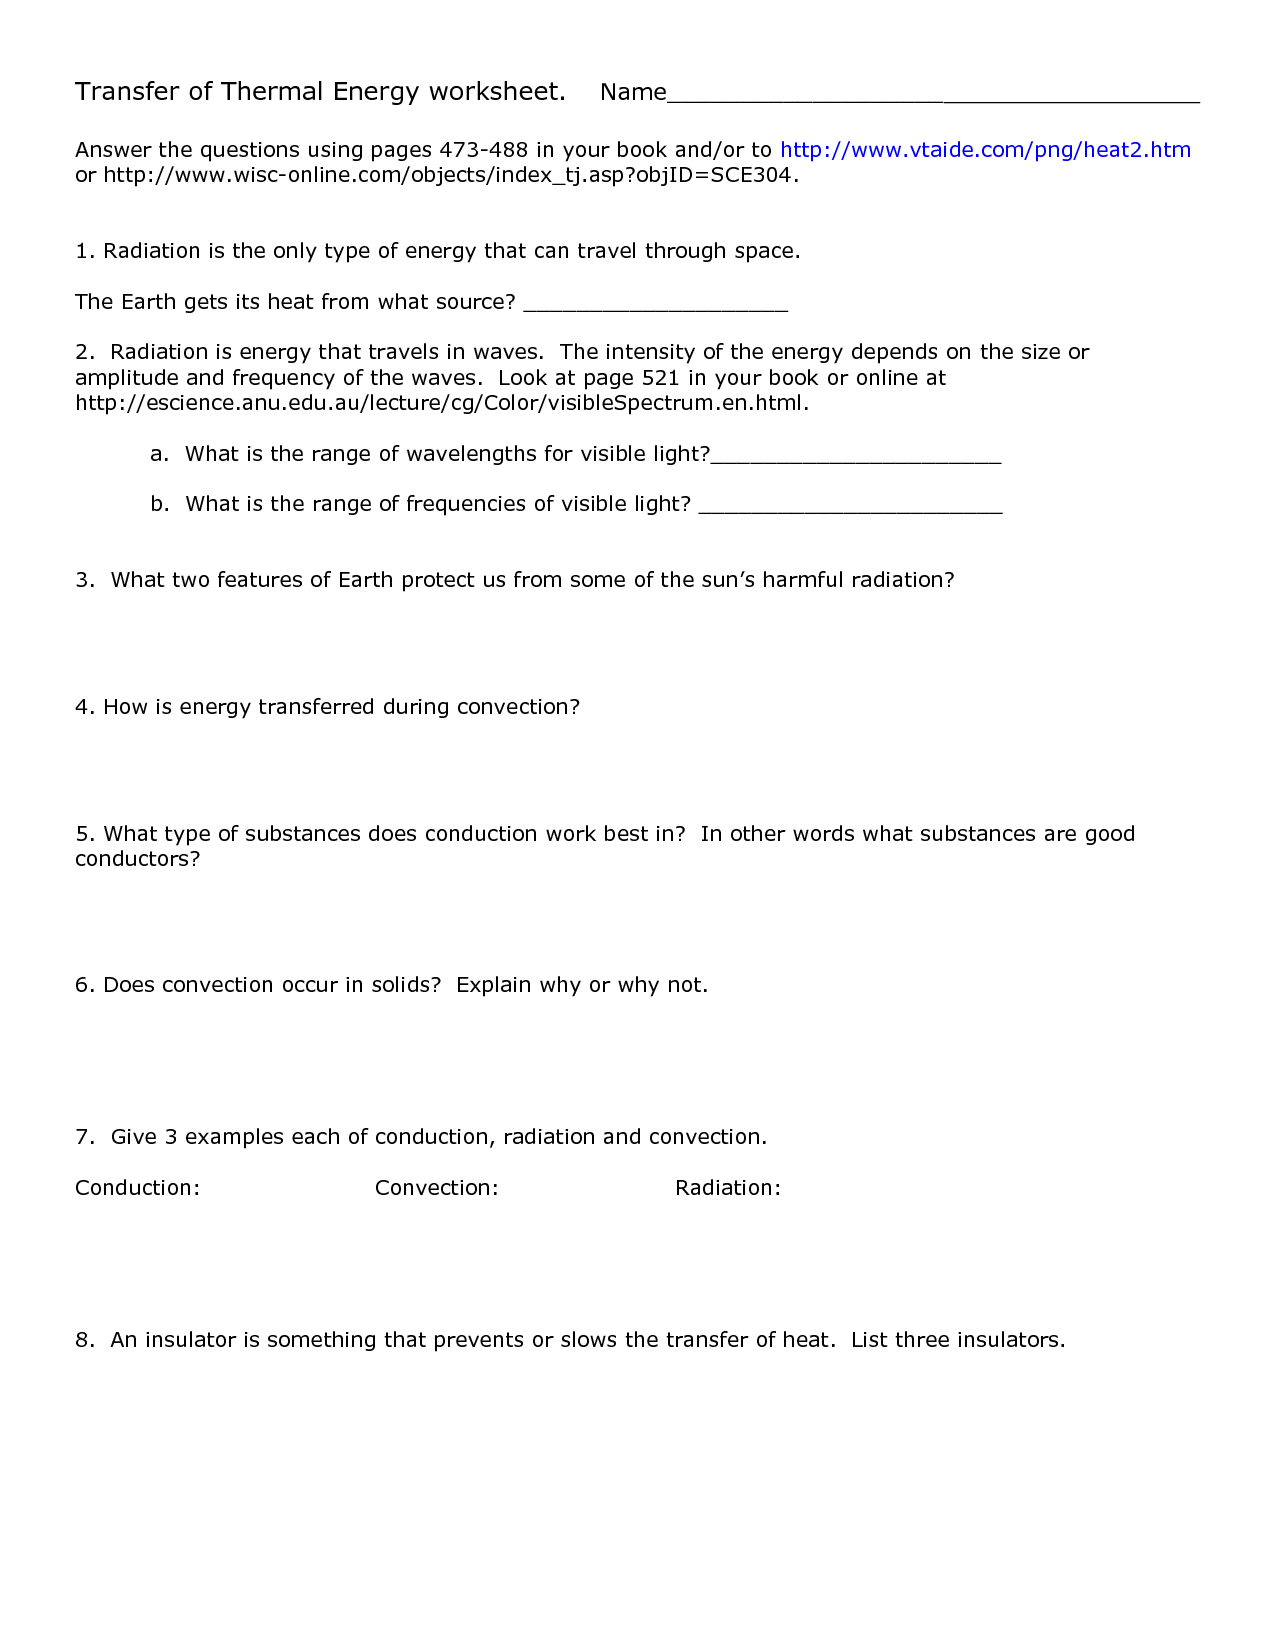 18 Images of Using Thermal Energy Worksheet